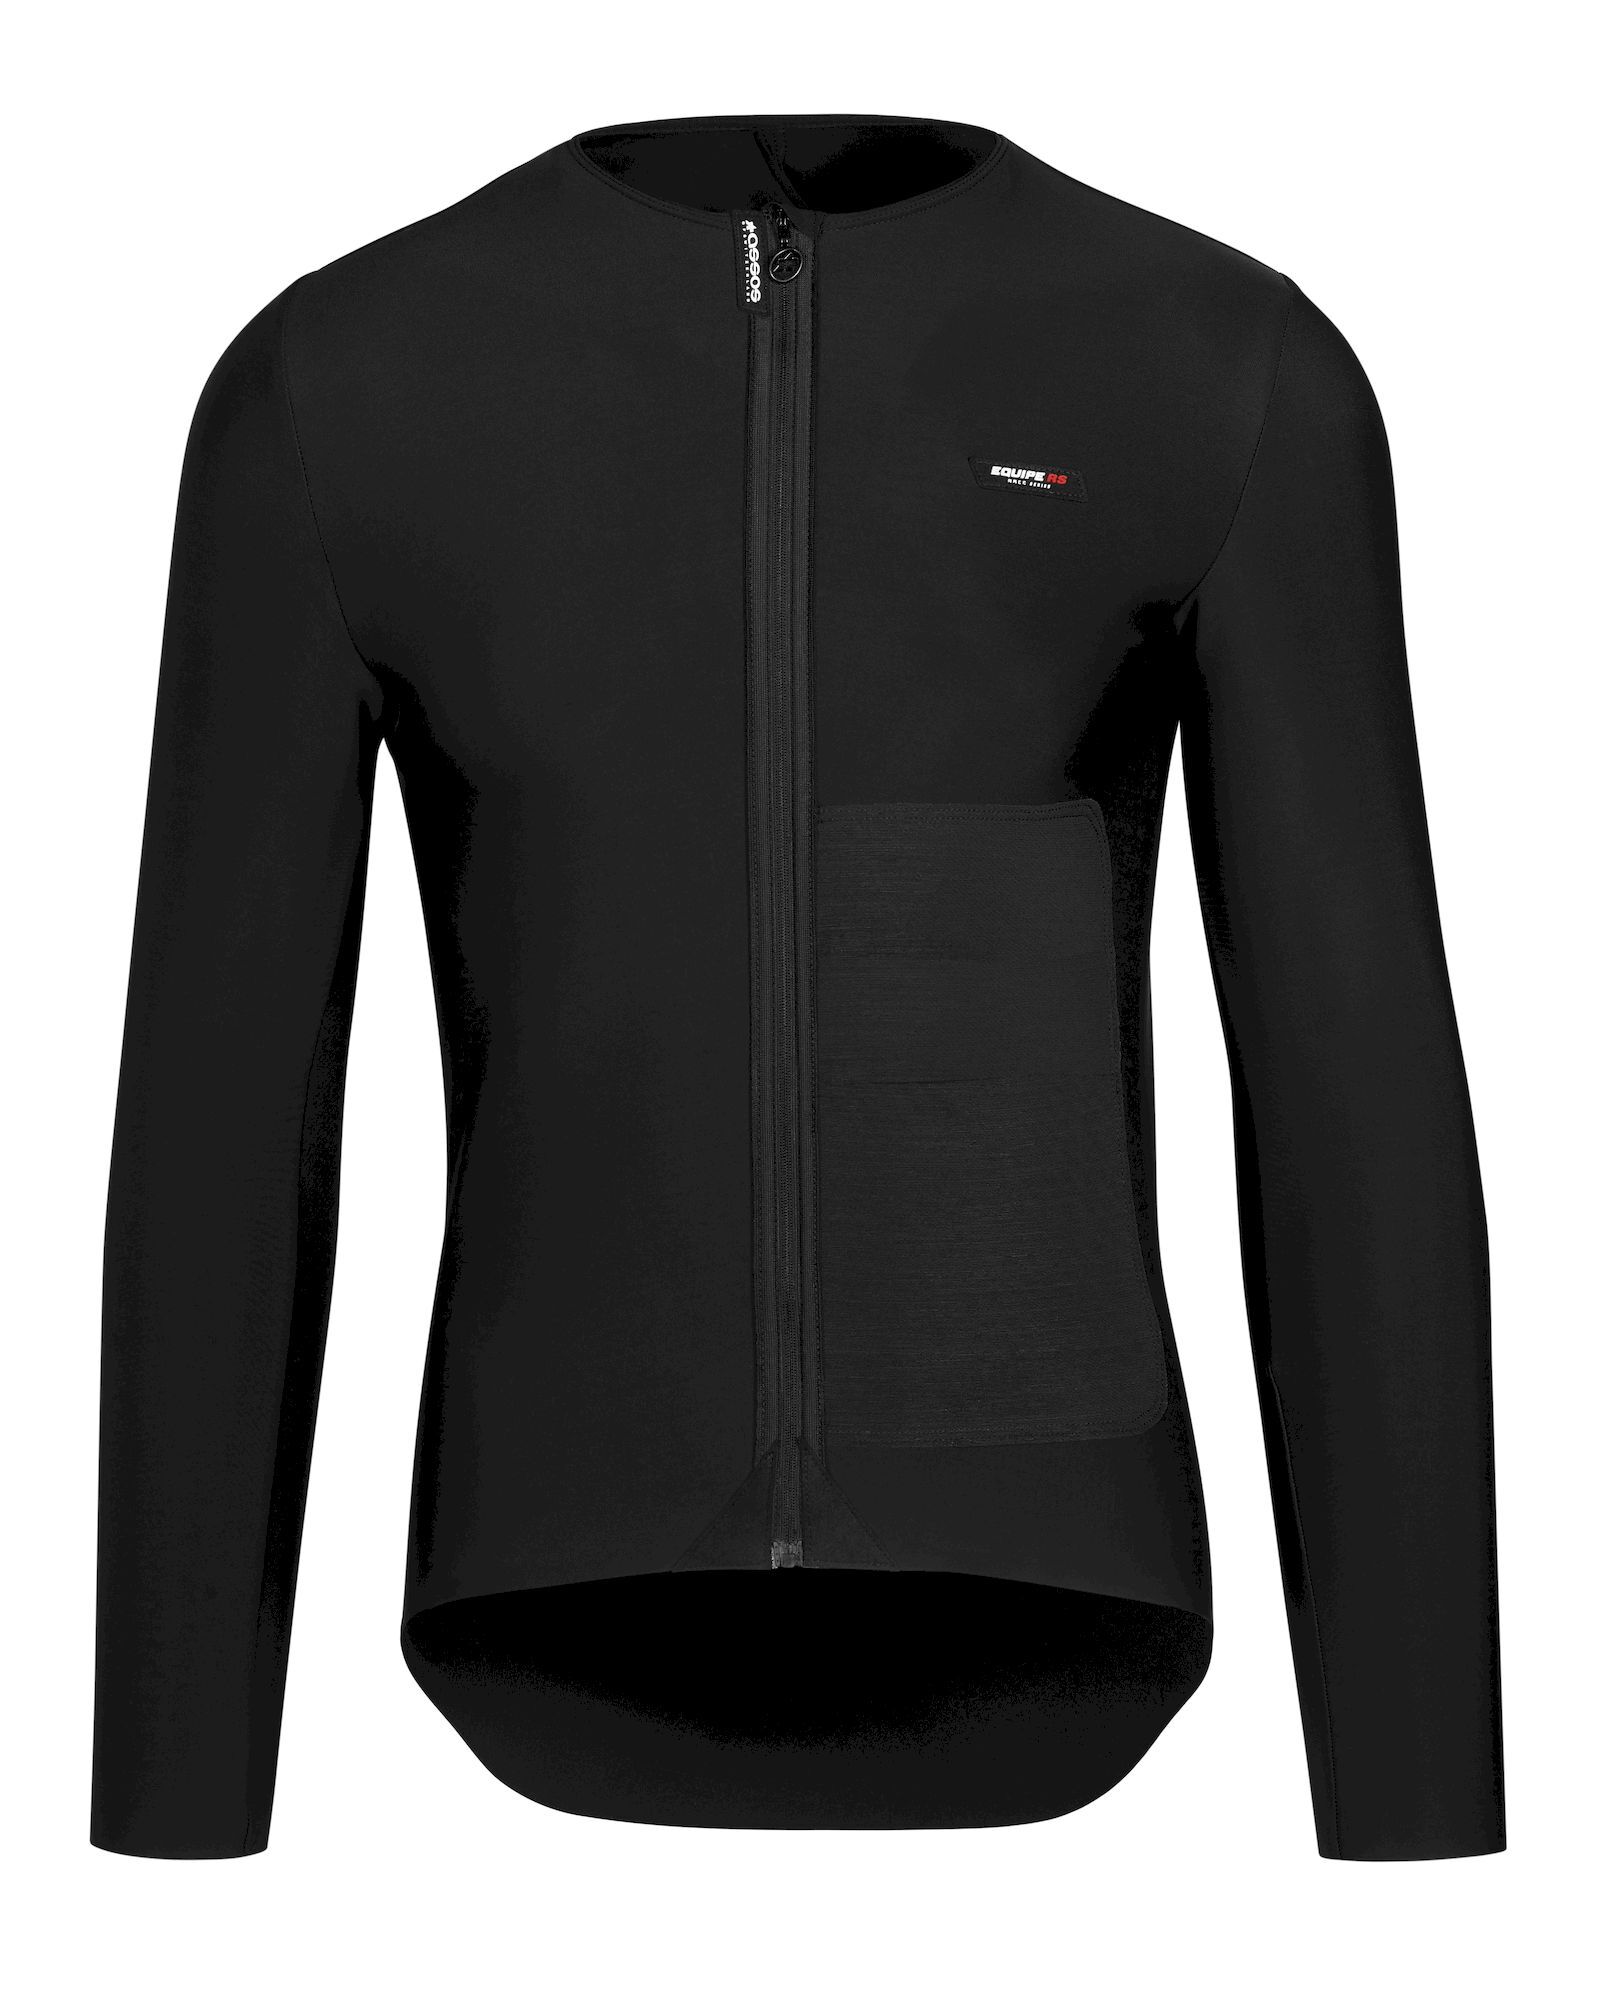 Assos Equipe RS Winter LS Mid Layer - Cycling jersey - Men's | Hardloop